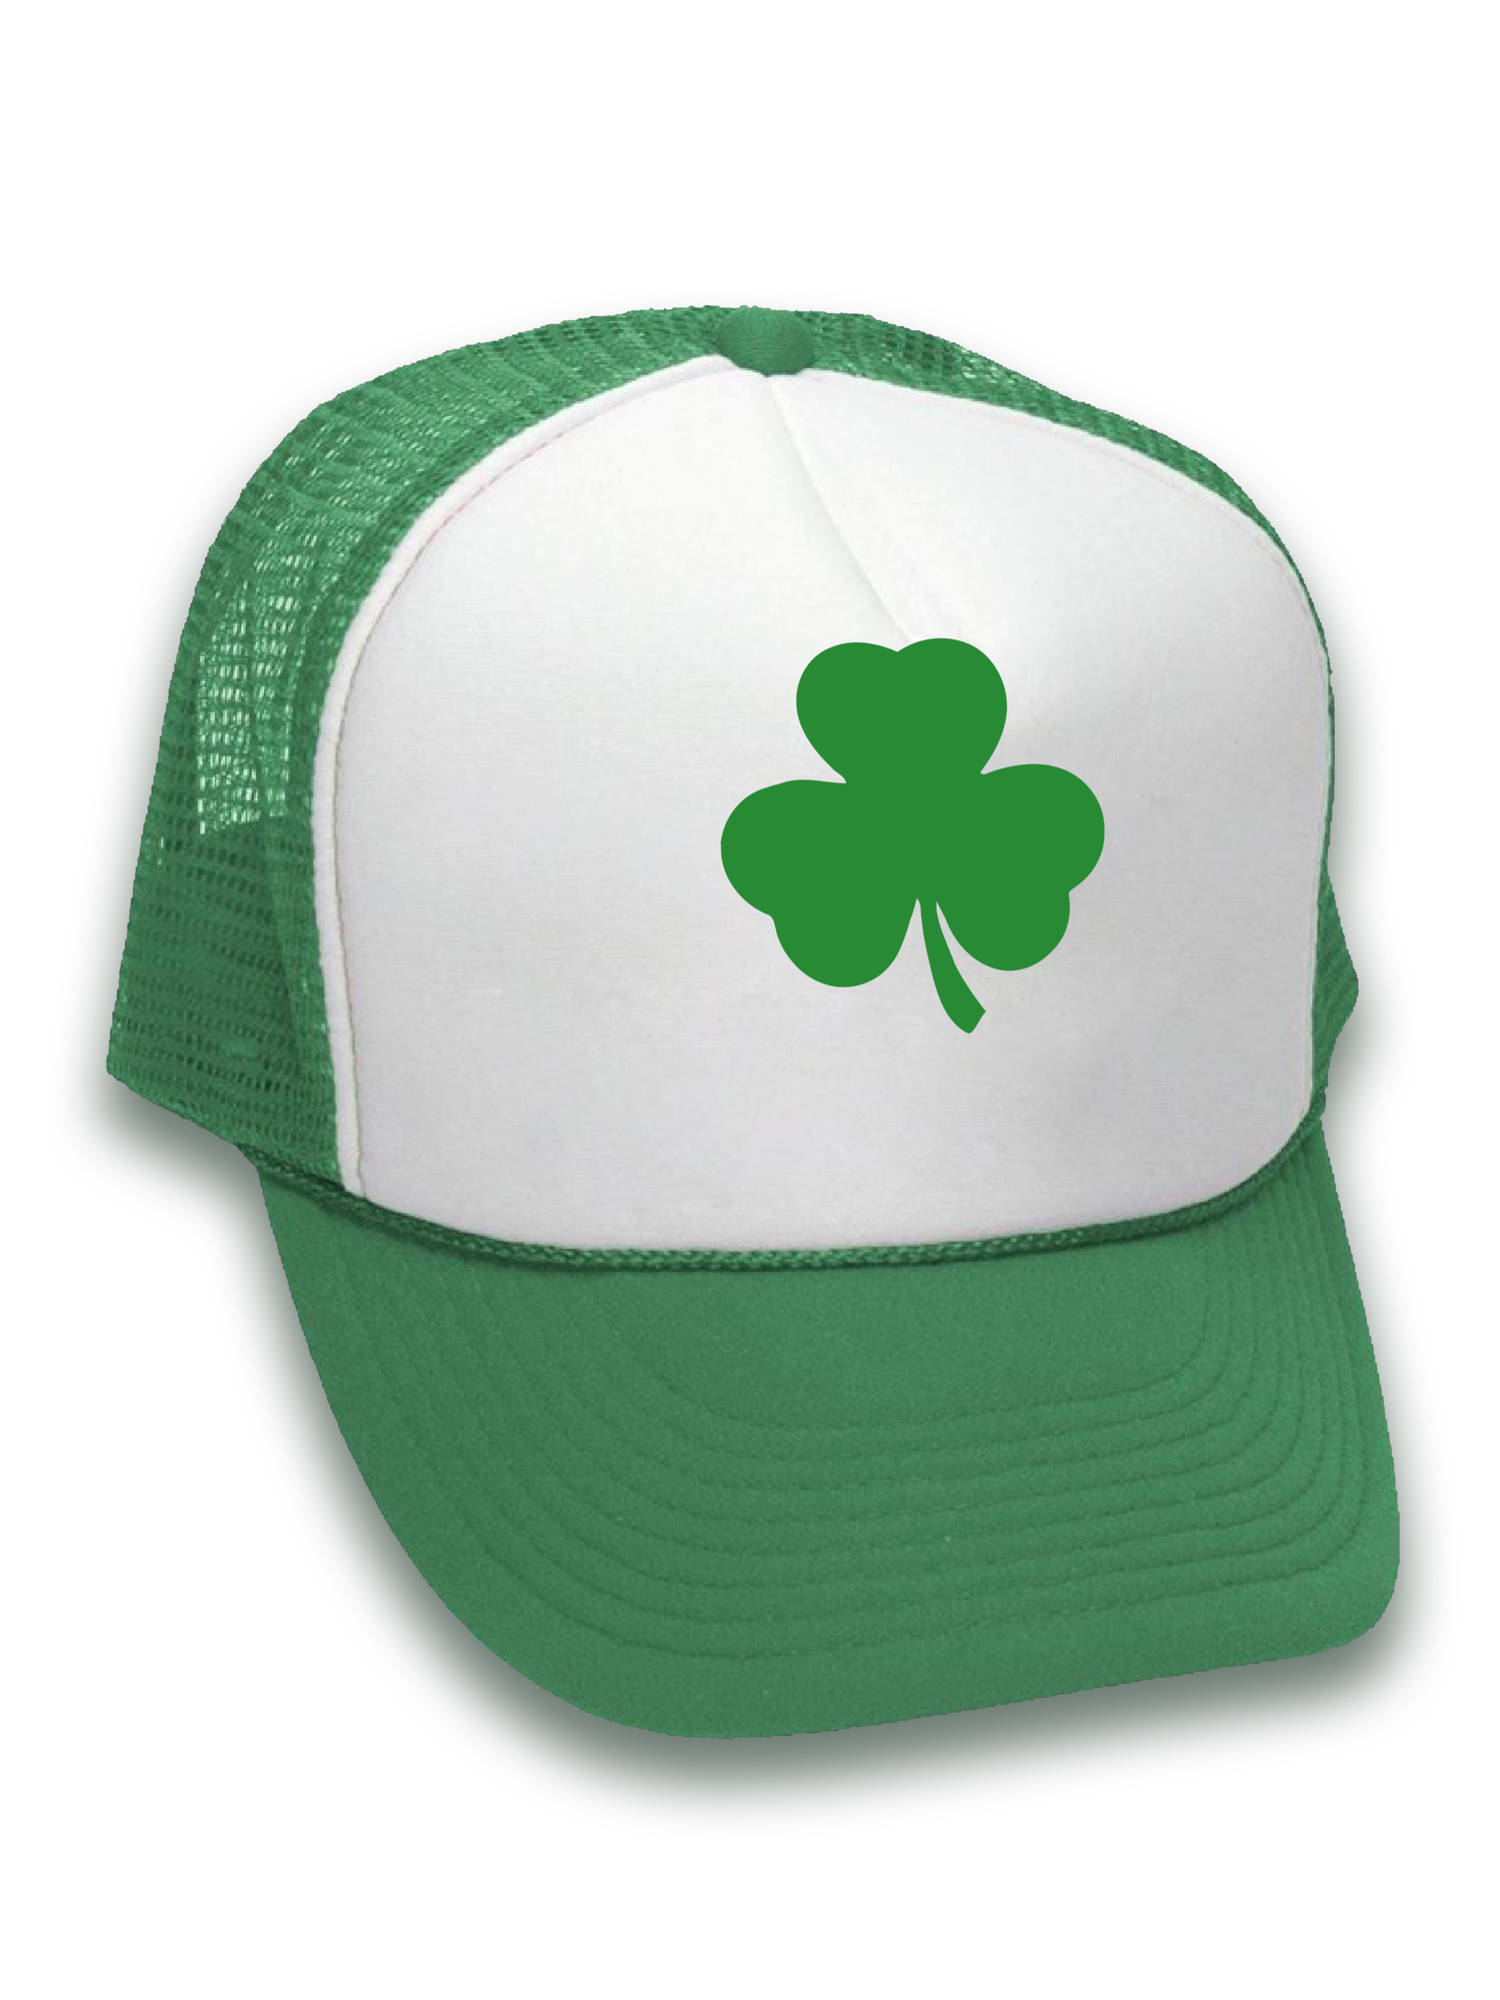 Awkward Styles St. Paddy's Day Trucker Hats for St. Patrick's Day Celebration Vintage Style Retro Mesh Cap Gift St. Patrick Top Hat Green Hat Gift for Him Gift for Her St. Patrick's Day Accessories - image 2 of 6